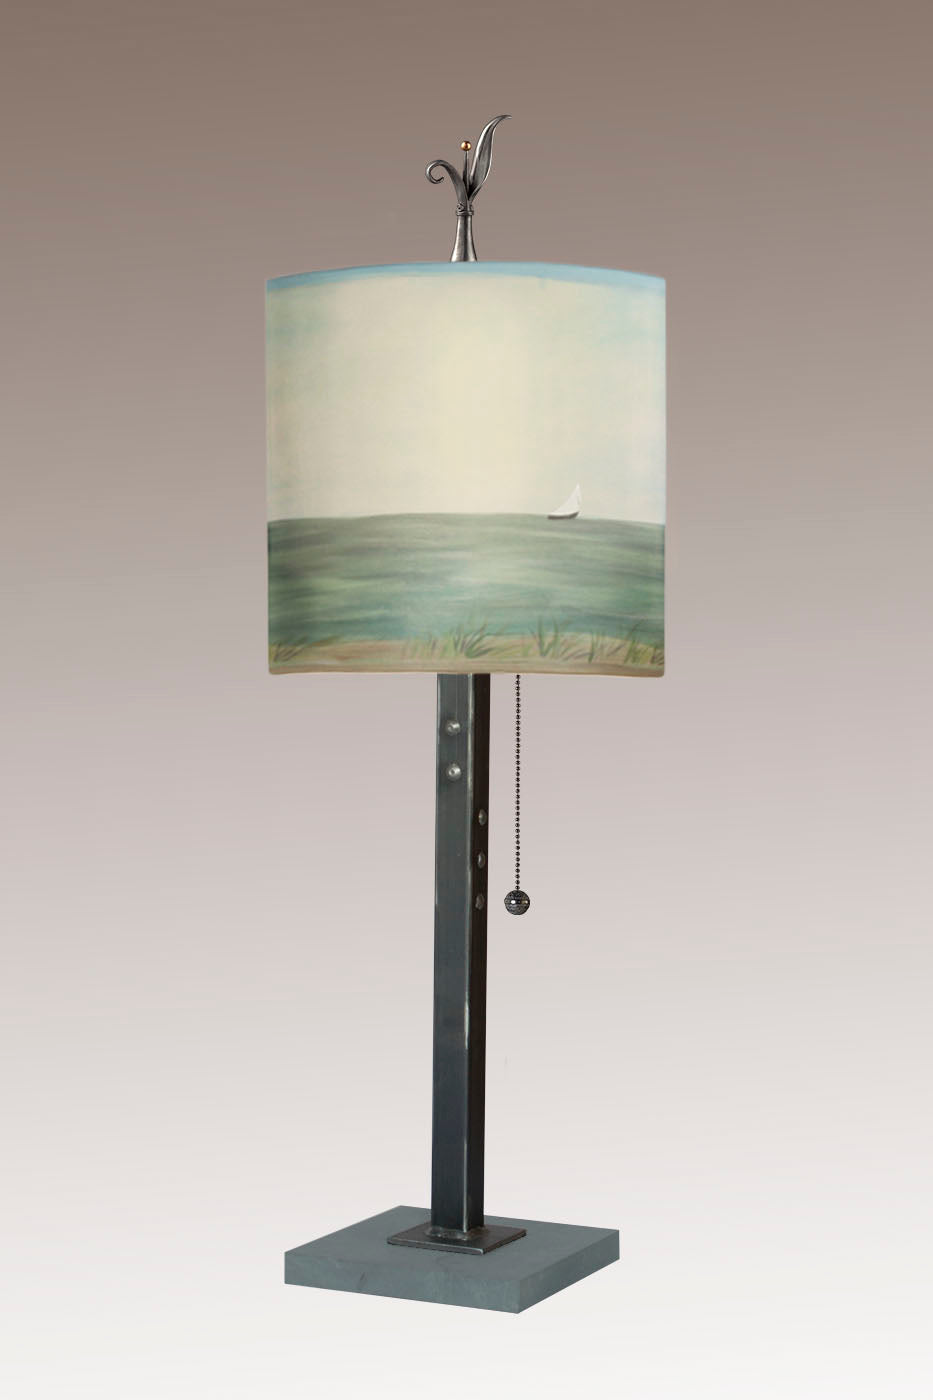 Janna Ugone & Co Table Lamps Steel Table Lamp with Medium Drum Shade in Shore